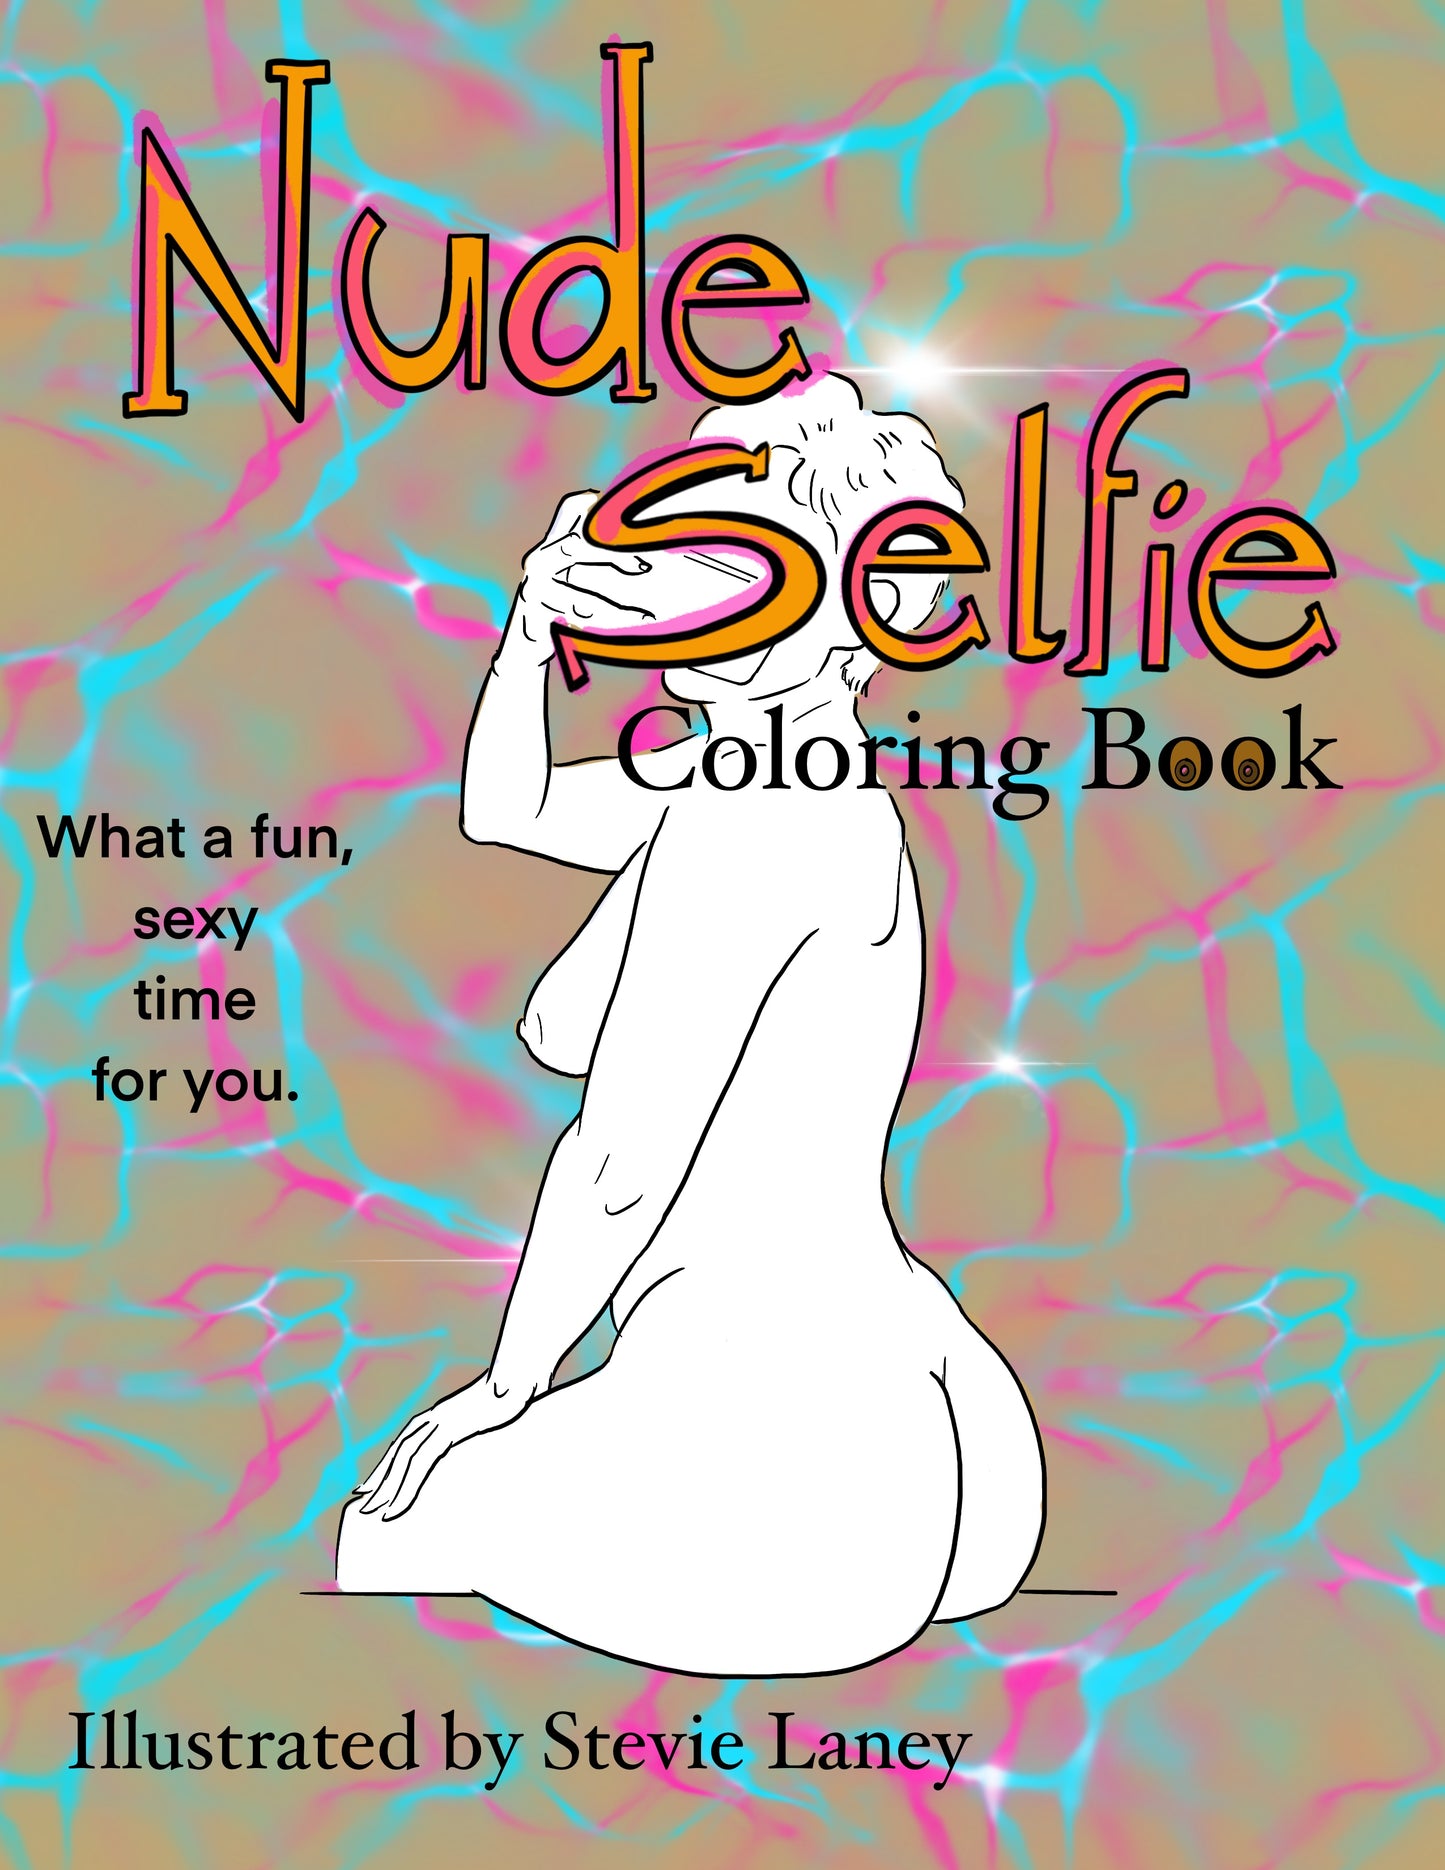 Nude Selfie Volume 3 Coloring Book for Adults